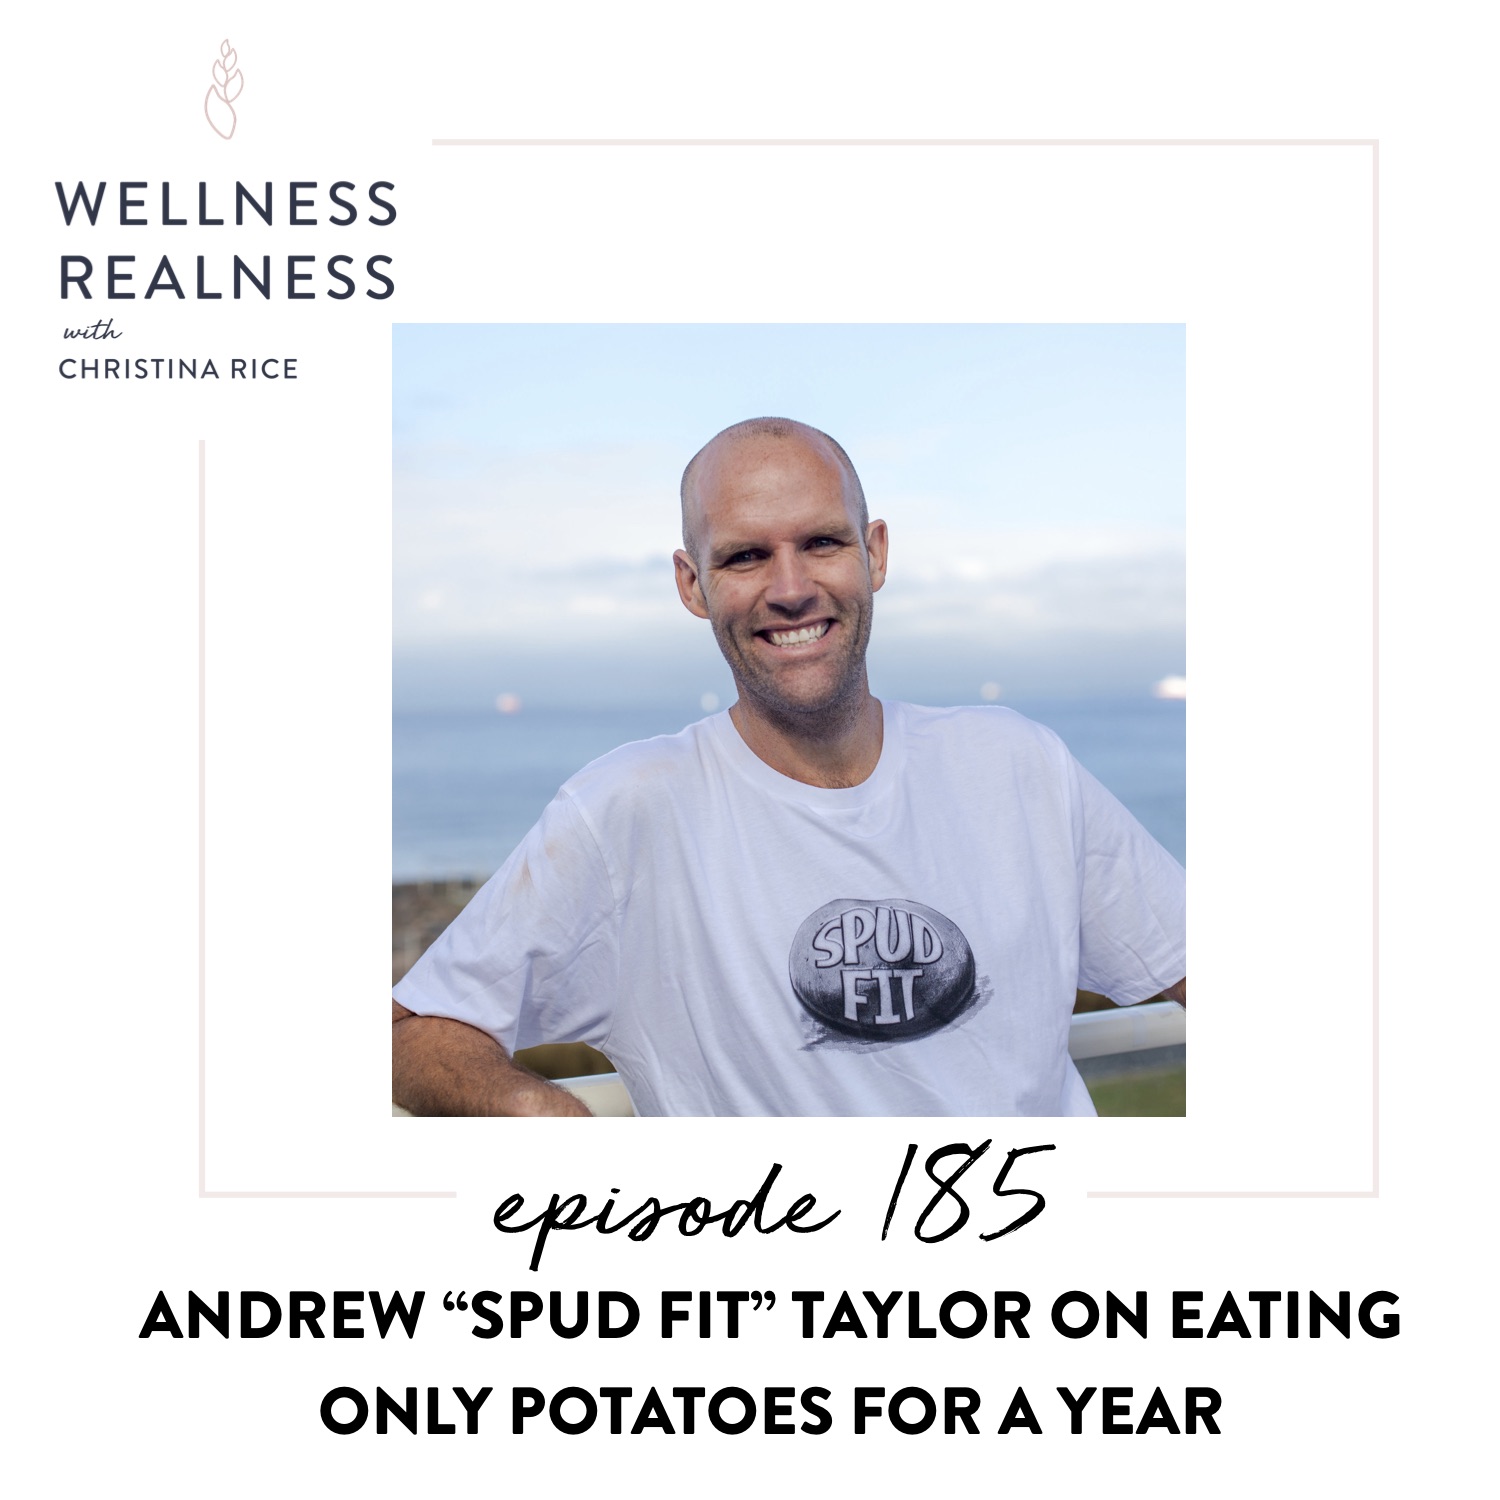 185: Andrew "Spud Fit" Taylor on Eating Only Potatoes for a Year